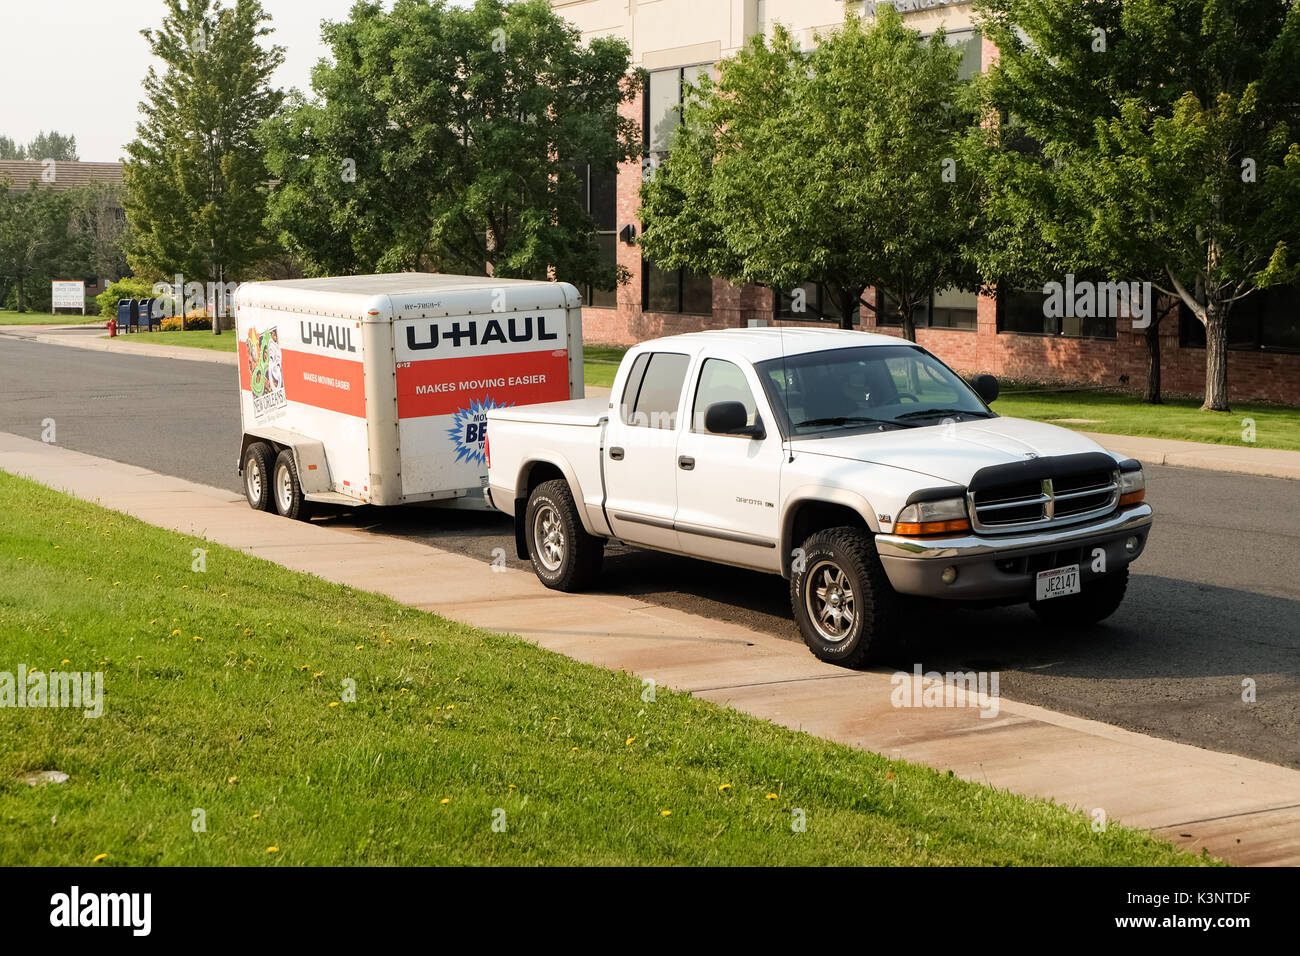 Denver, Colorado, USA - August 7,2017: U-Haul cargo trailer at a street. U-Haul truck is a moving equipment and storage rental company. Stock Photo